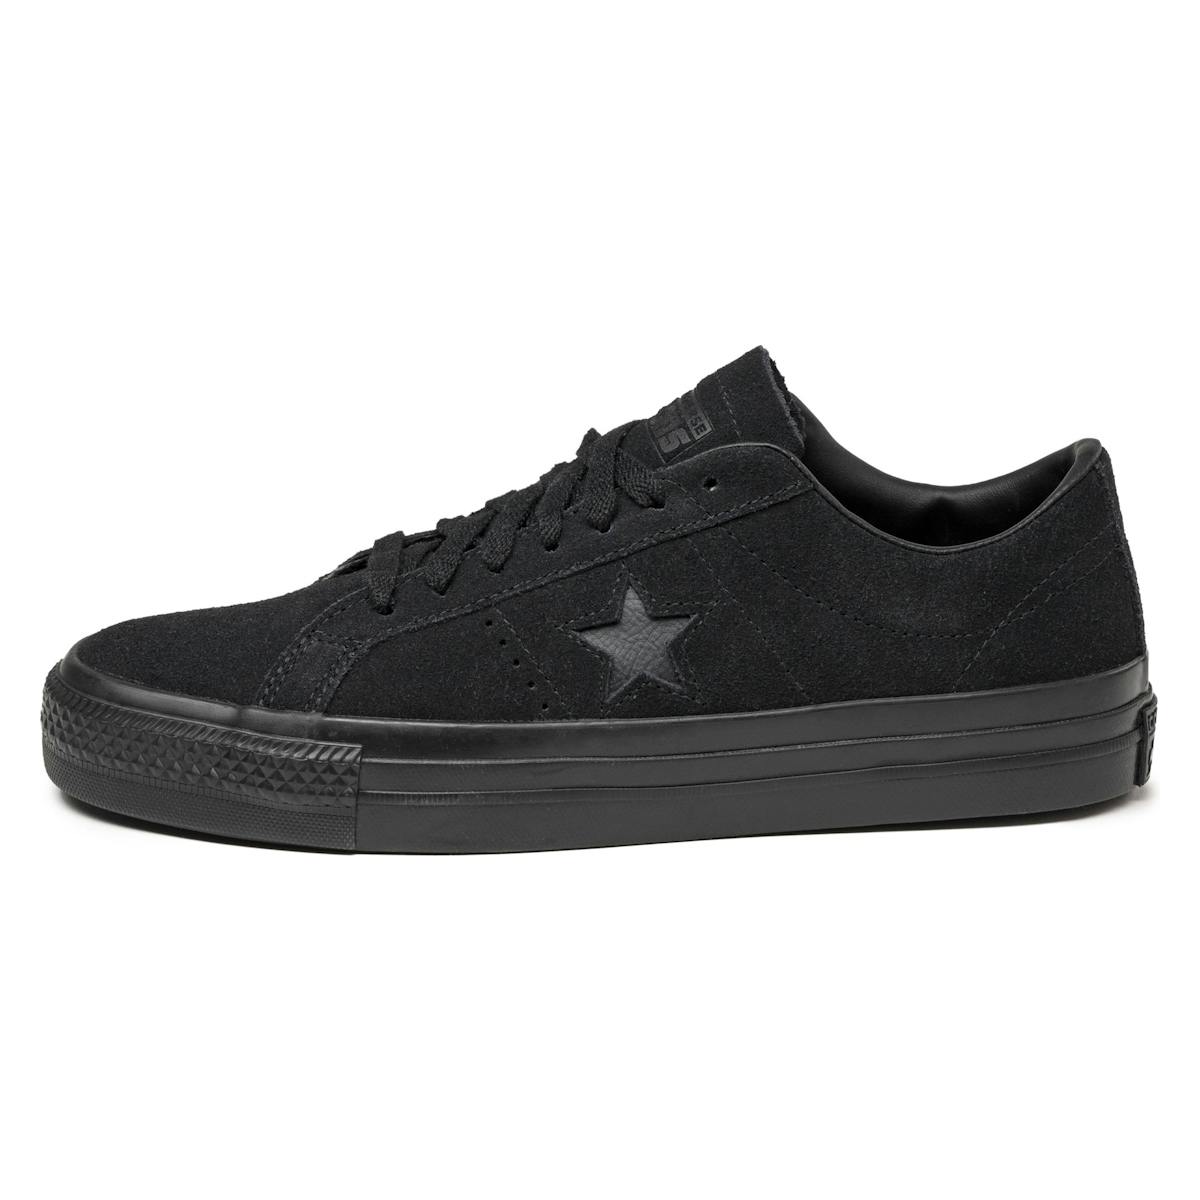 Converse CONS One Star Pro Suede